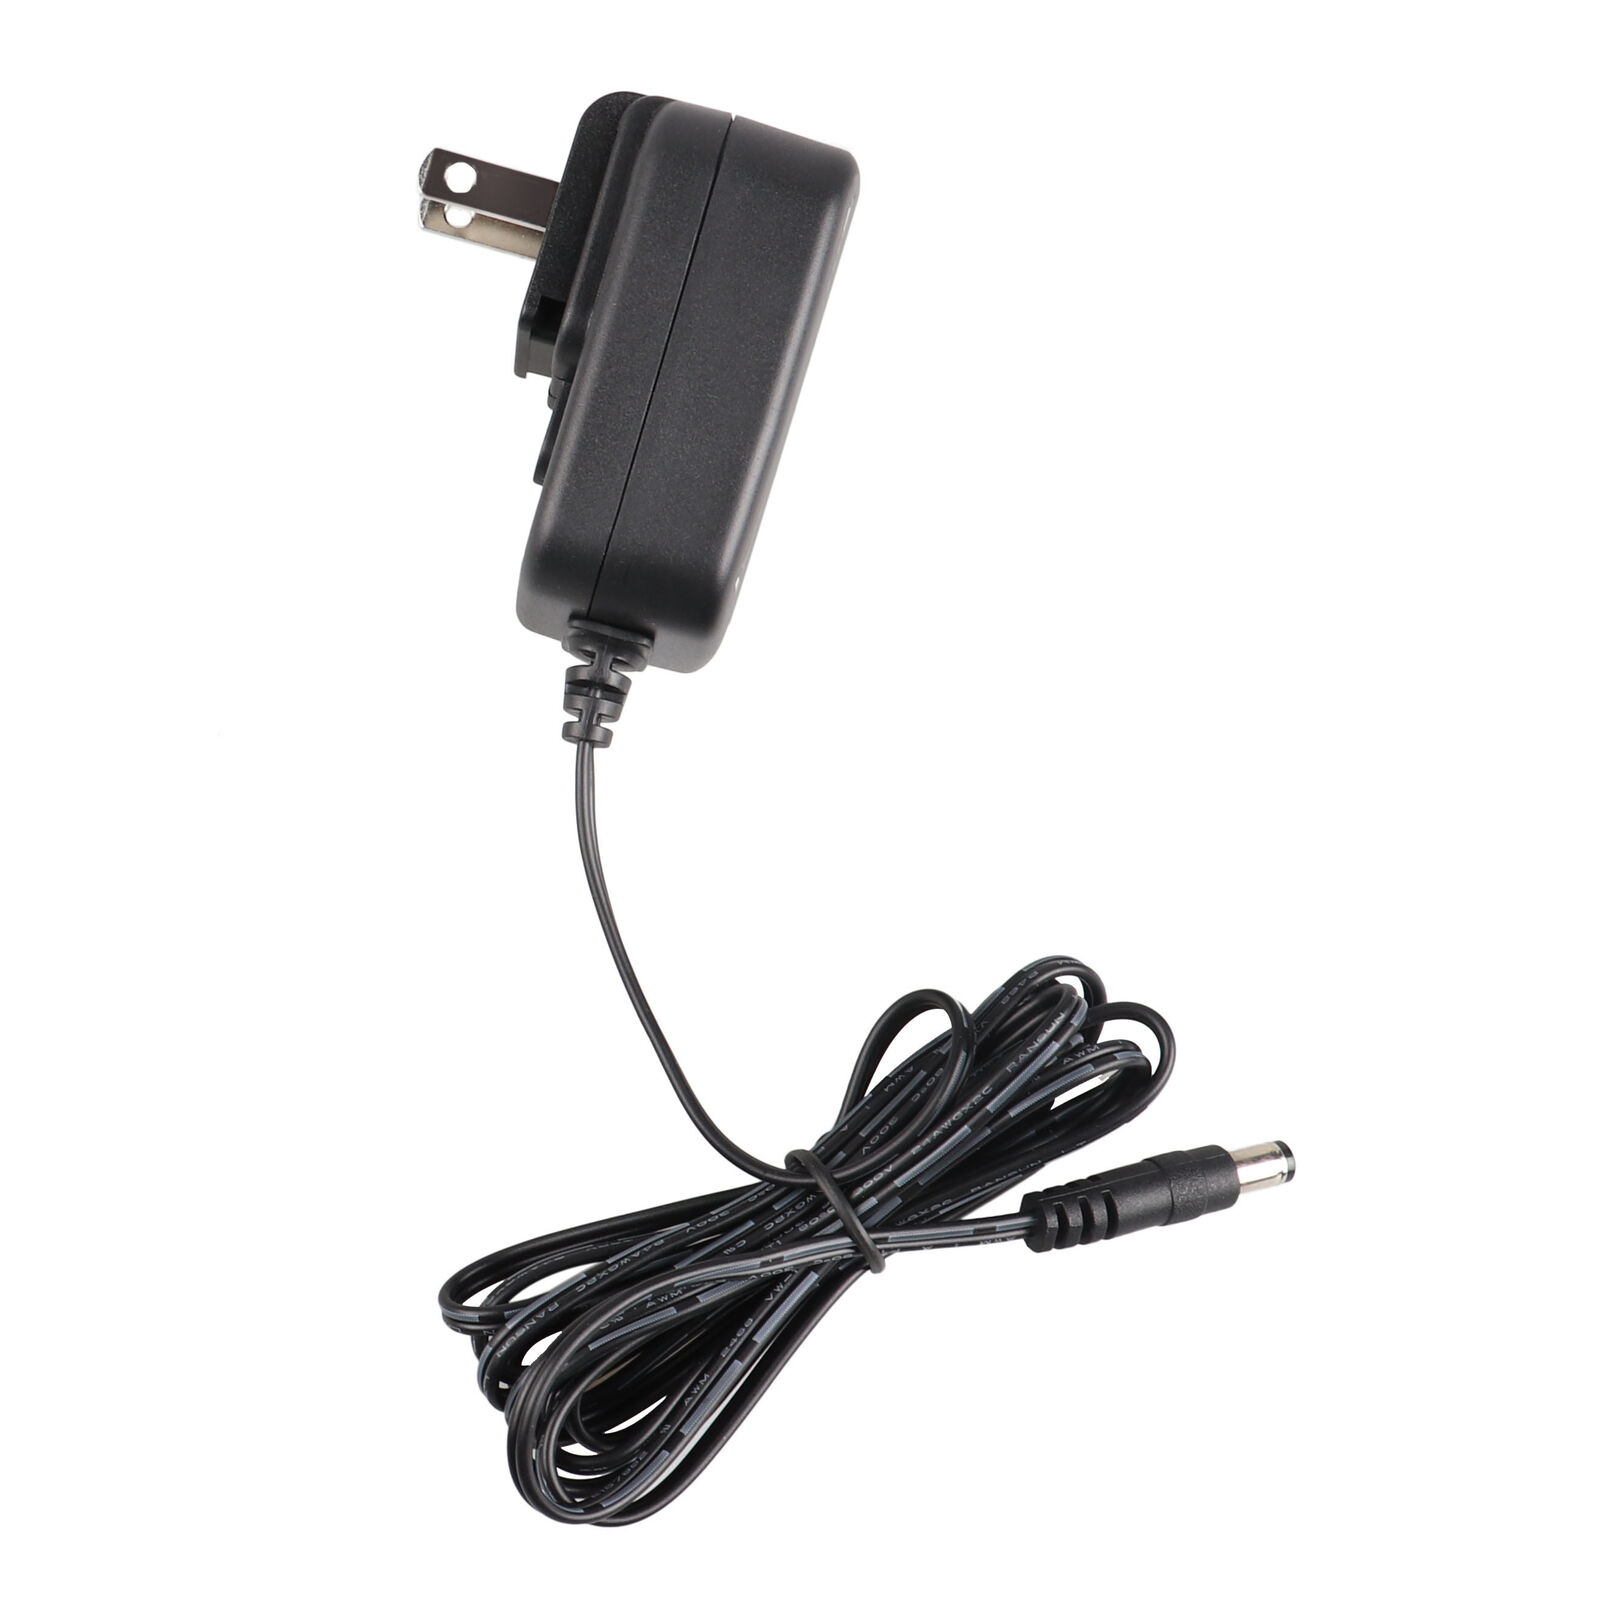 *Brand NEW* 5v Charger AC DC ADAPTE10" VIMICRO VC882 GOOGLE ANDROID 4.0 TABLET PC Power